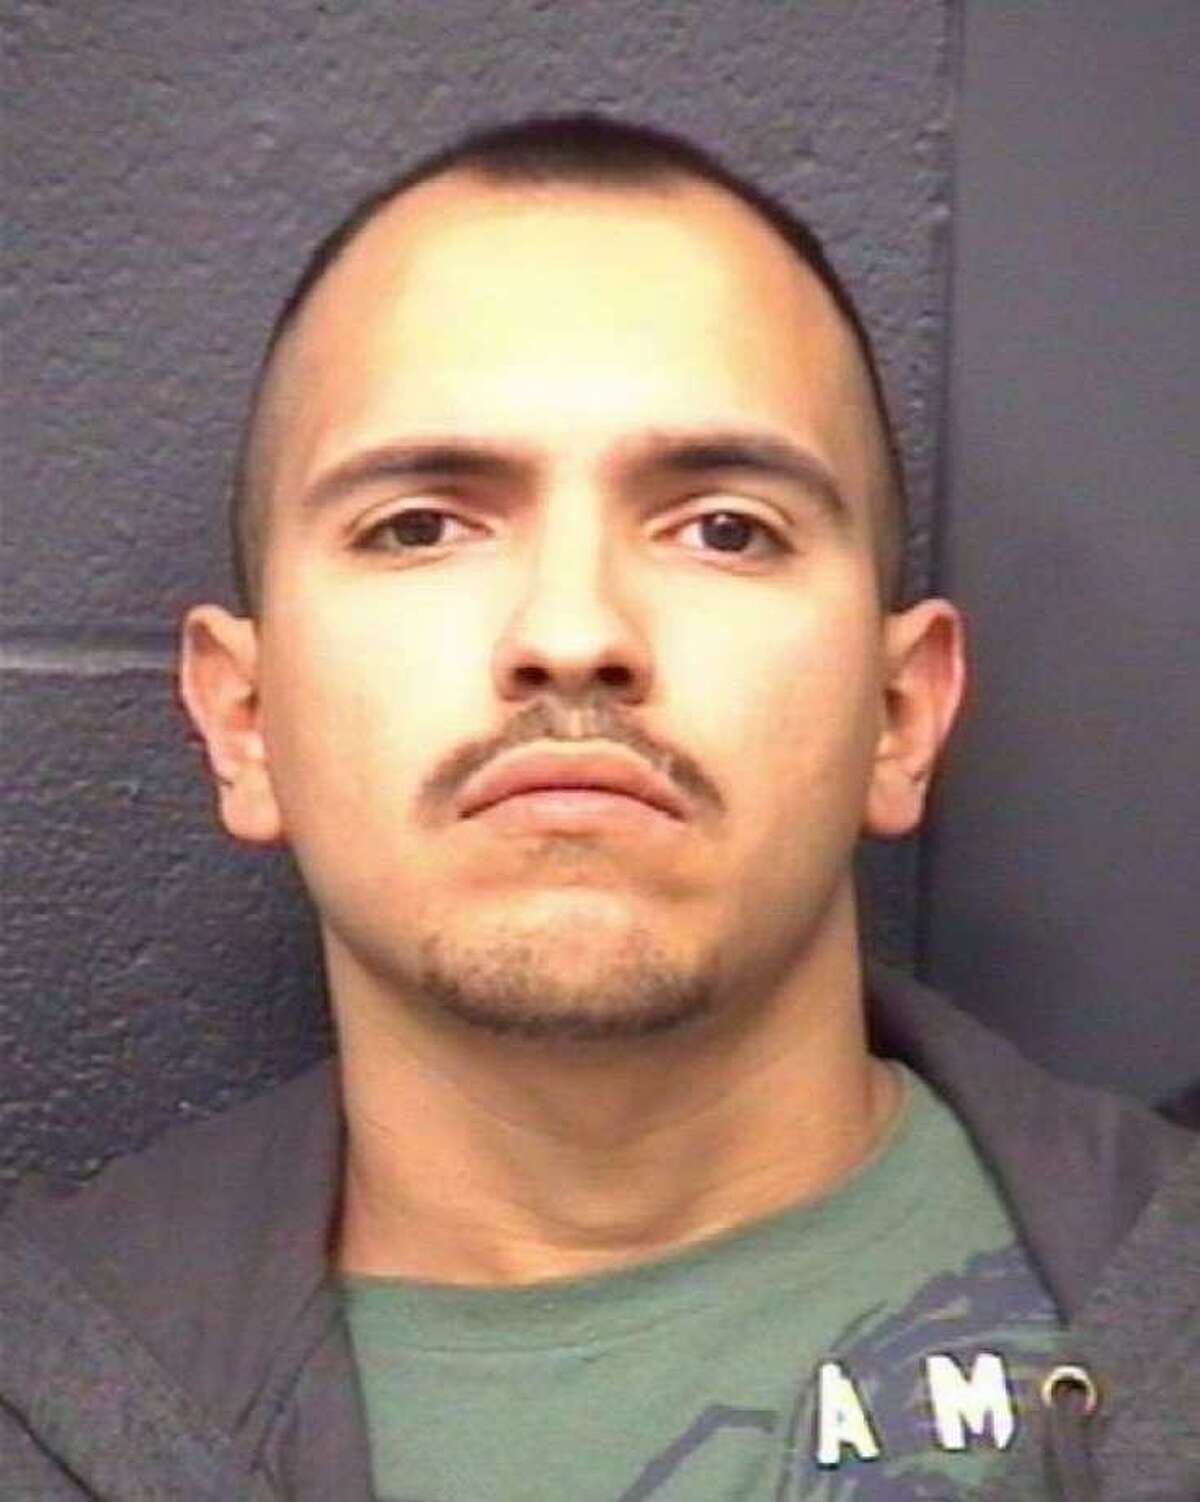 Nelson Anthony Jasso, 30, was indicted on a murder charge in June for the slaying of 38-year-old Juan Antonio Gutierrez. He was found guilty of fatallying shooting Gutierrez and was sentenced to 25 years in prison on Wednesday.